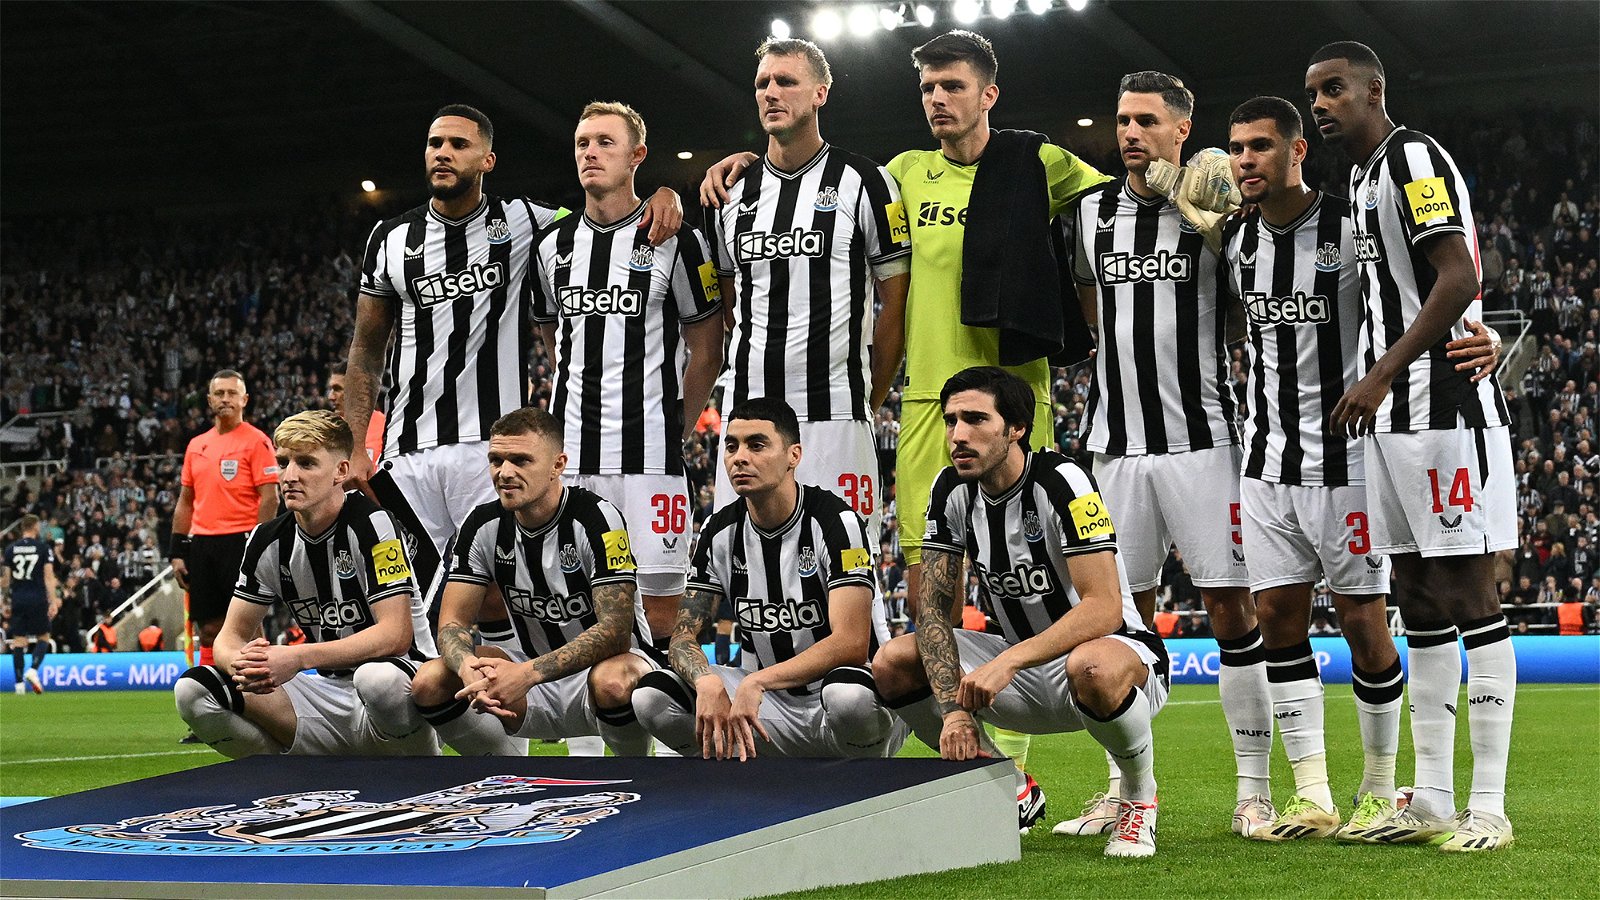 Newcastle 4 PSG 1 - Match ratings and comments on all of the NUFC